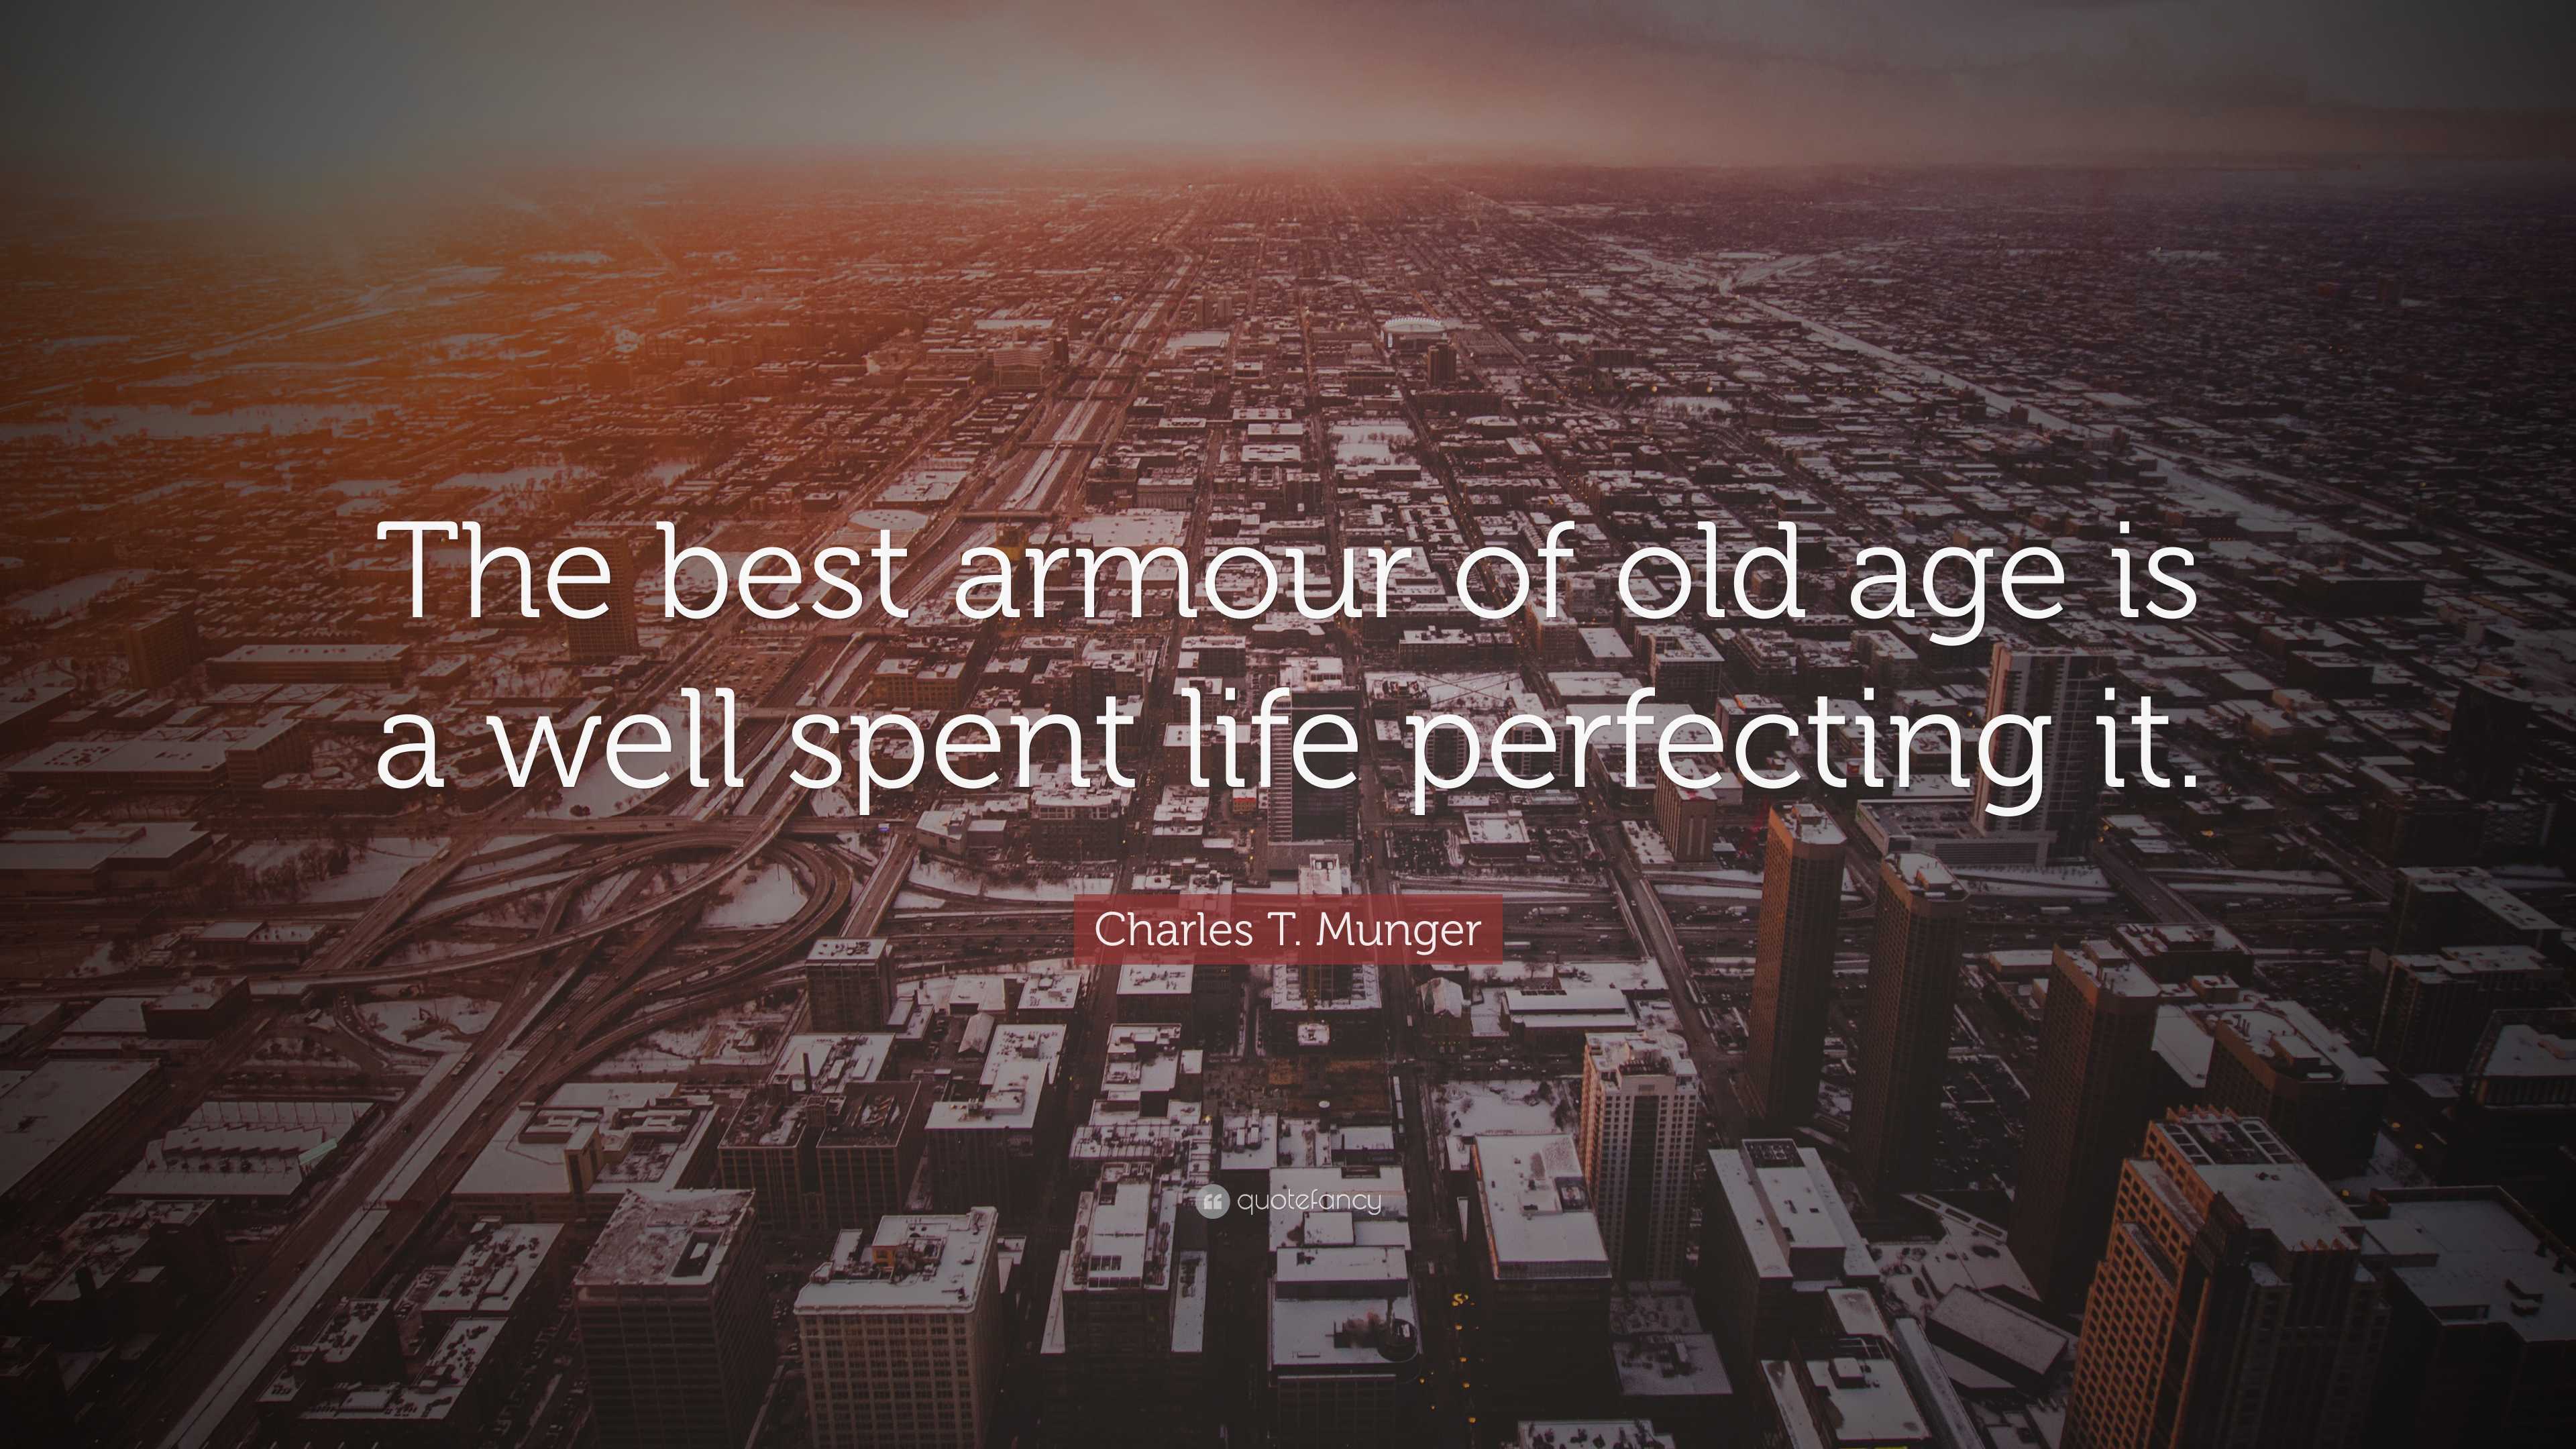 Charles T. Munger Quote: “The best armour of old age is a